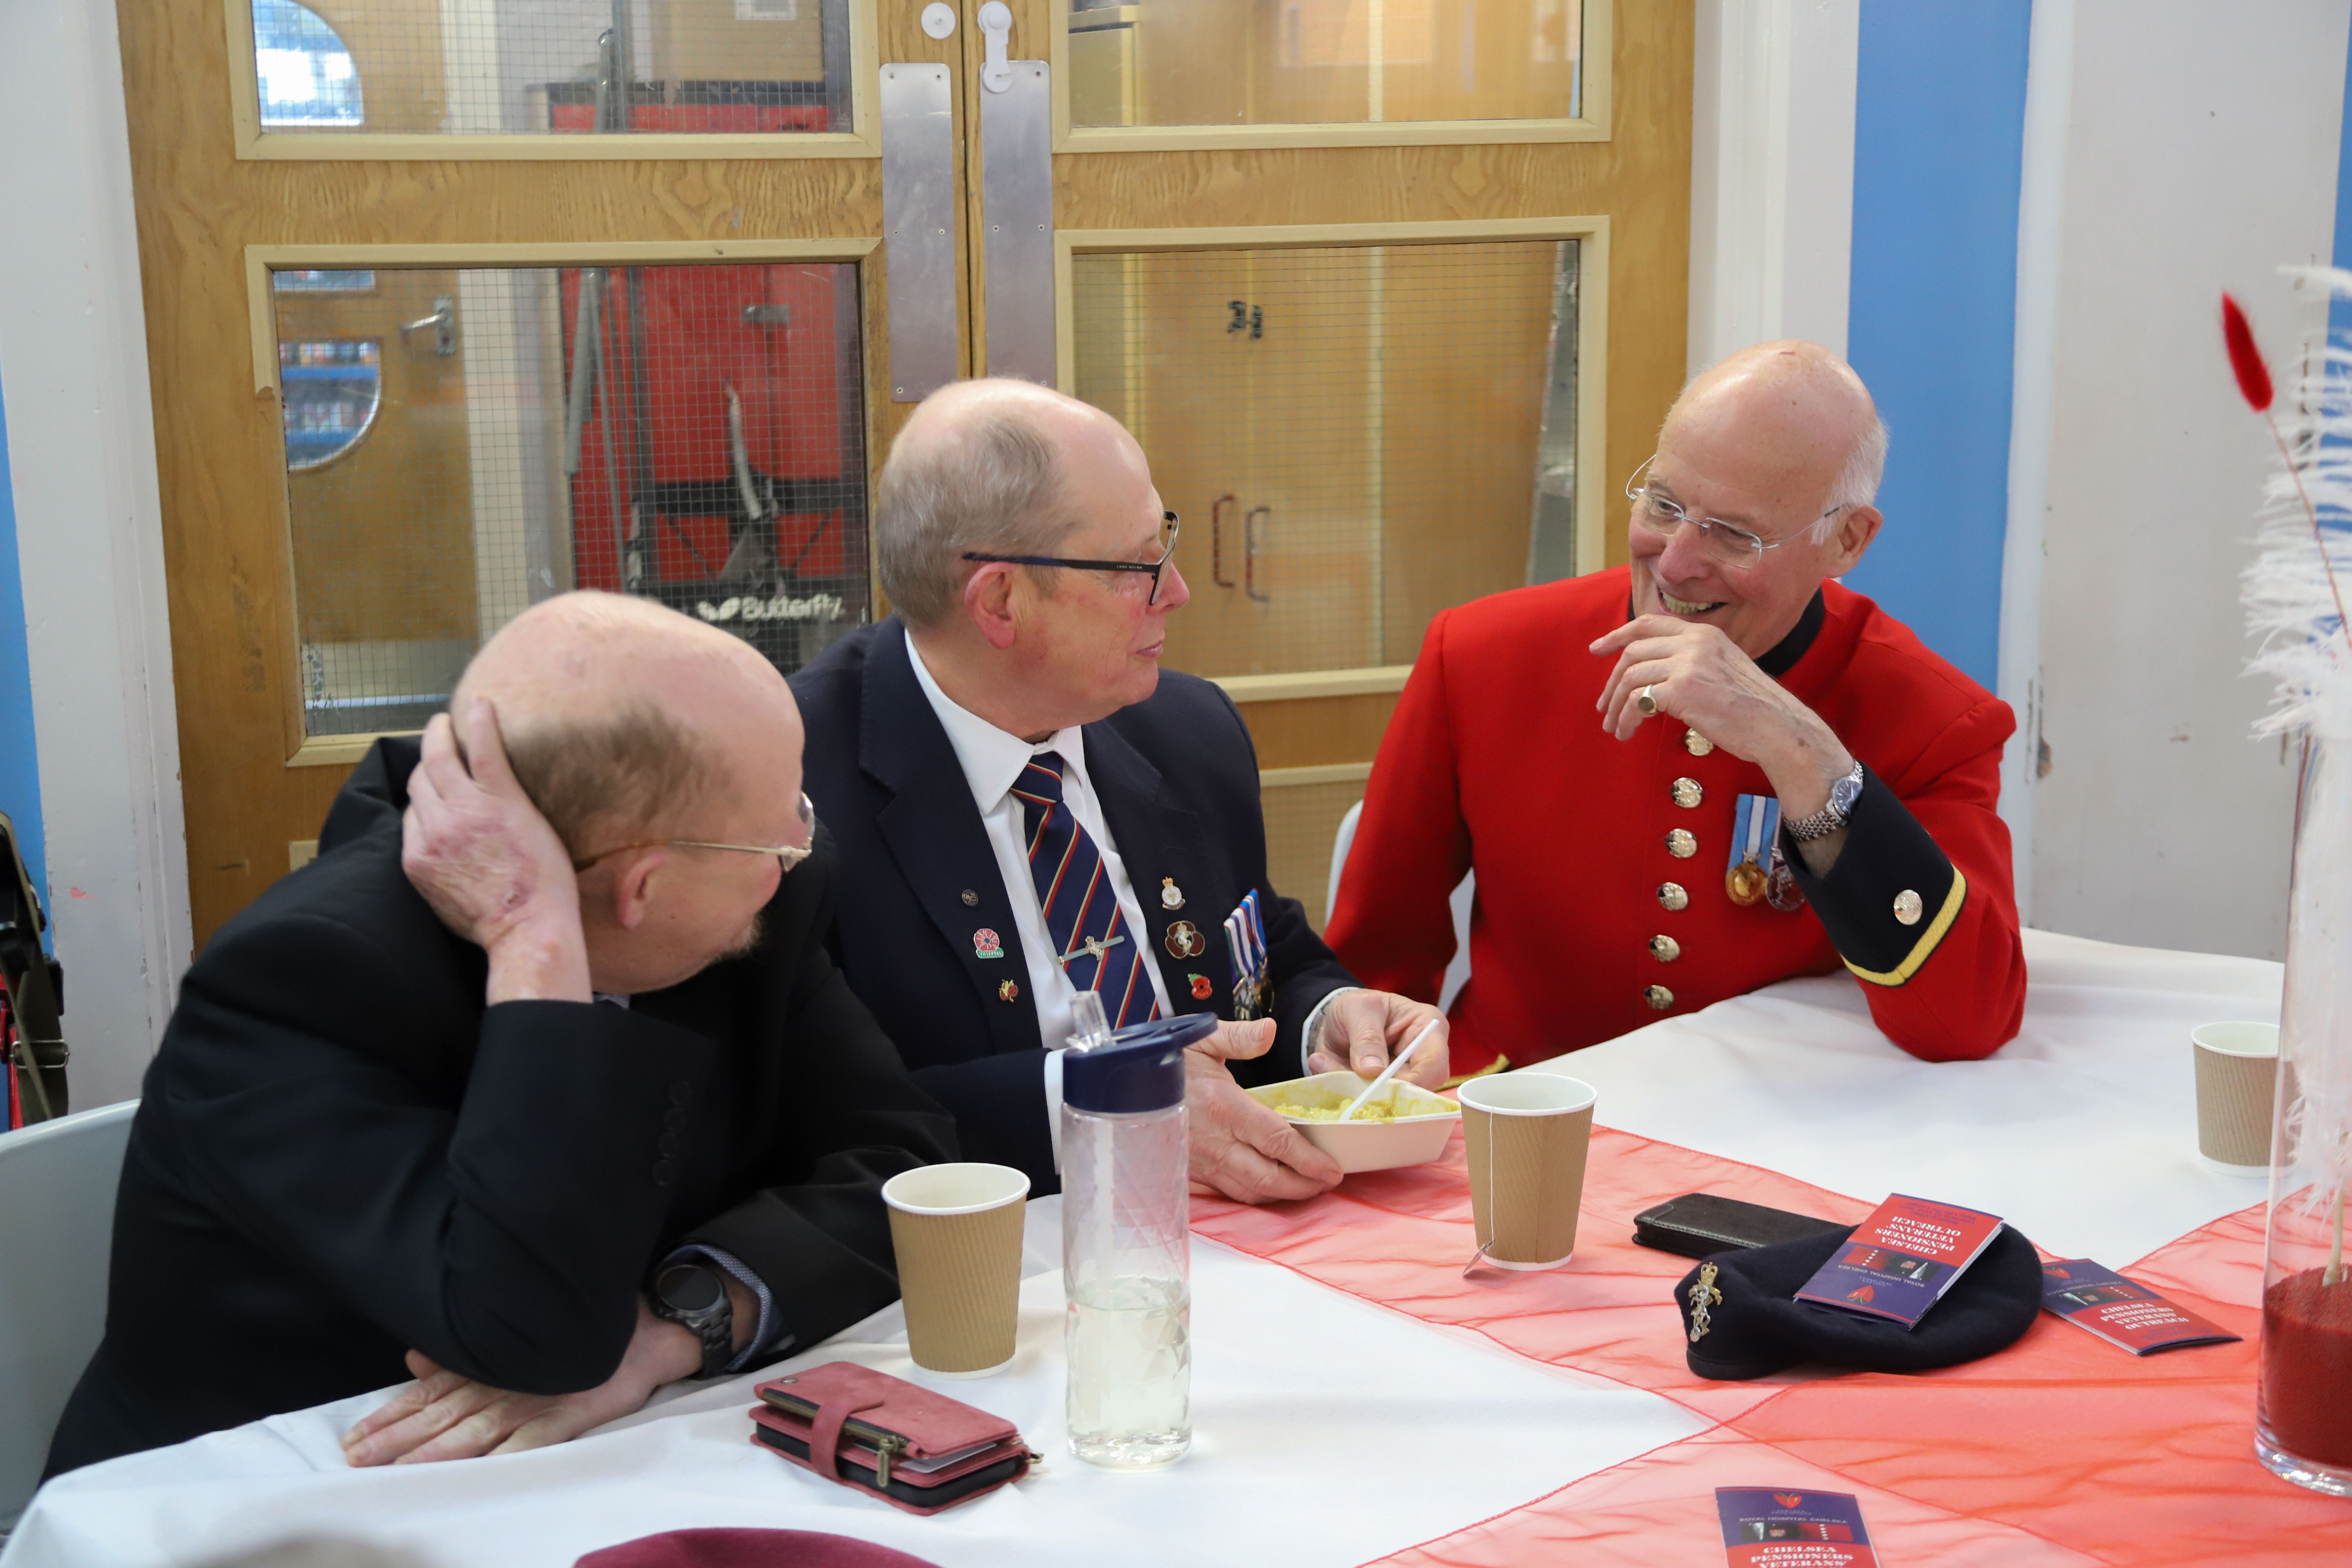 Chelsea Pensioner in scarlet uniform sat with two Veterans talking and smiling